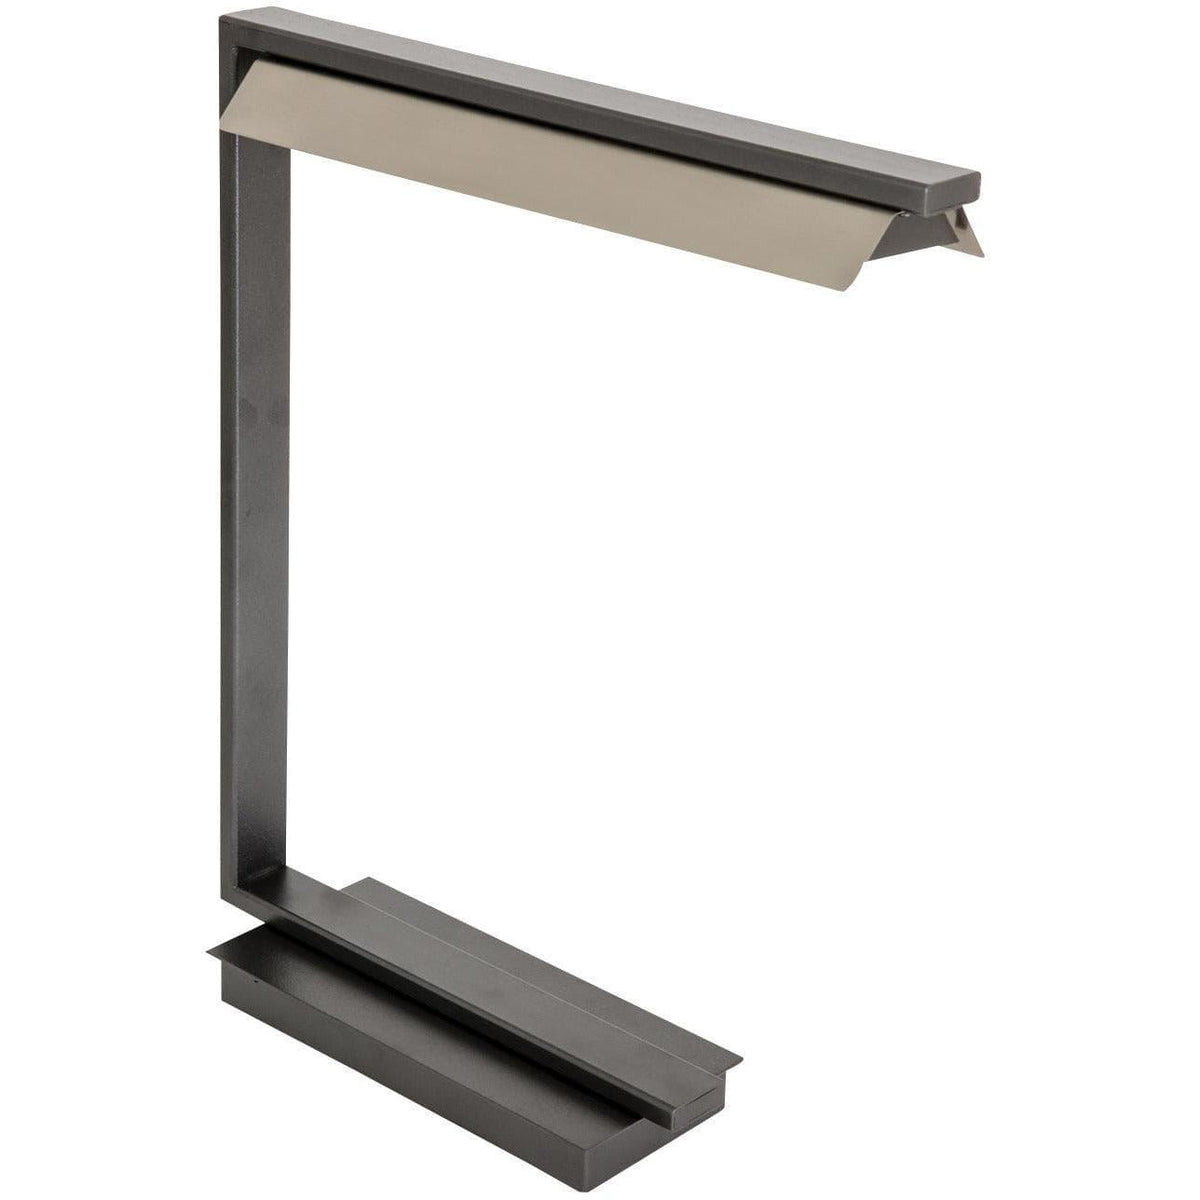 House of Troy - Jay LED Table Lamp - JLED550-GT | Montreal Lighting & Hardware